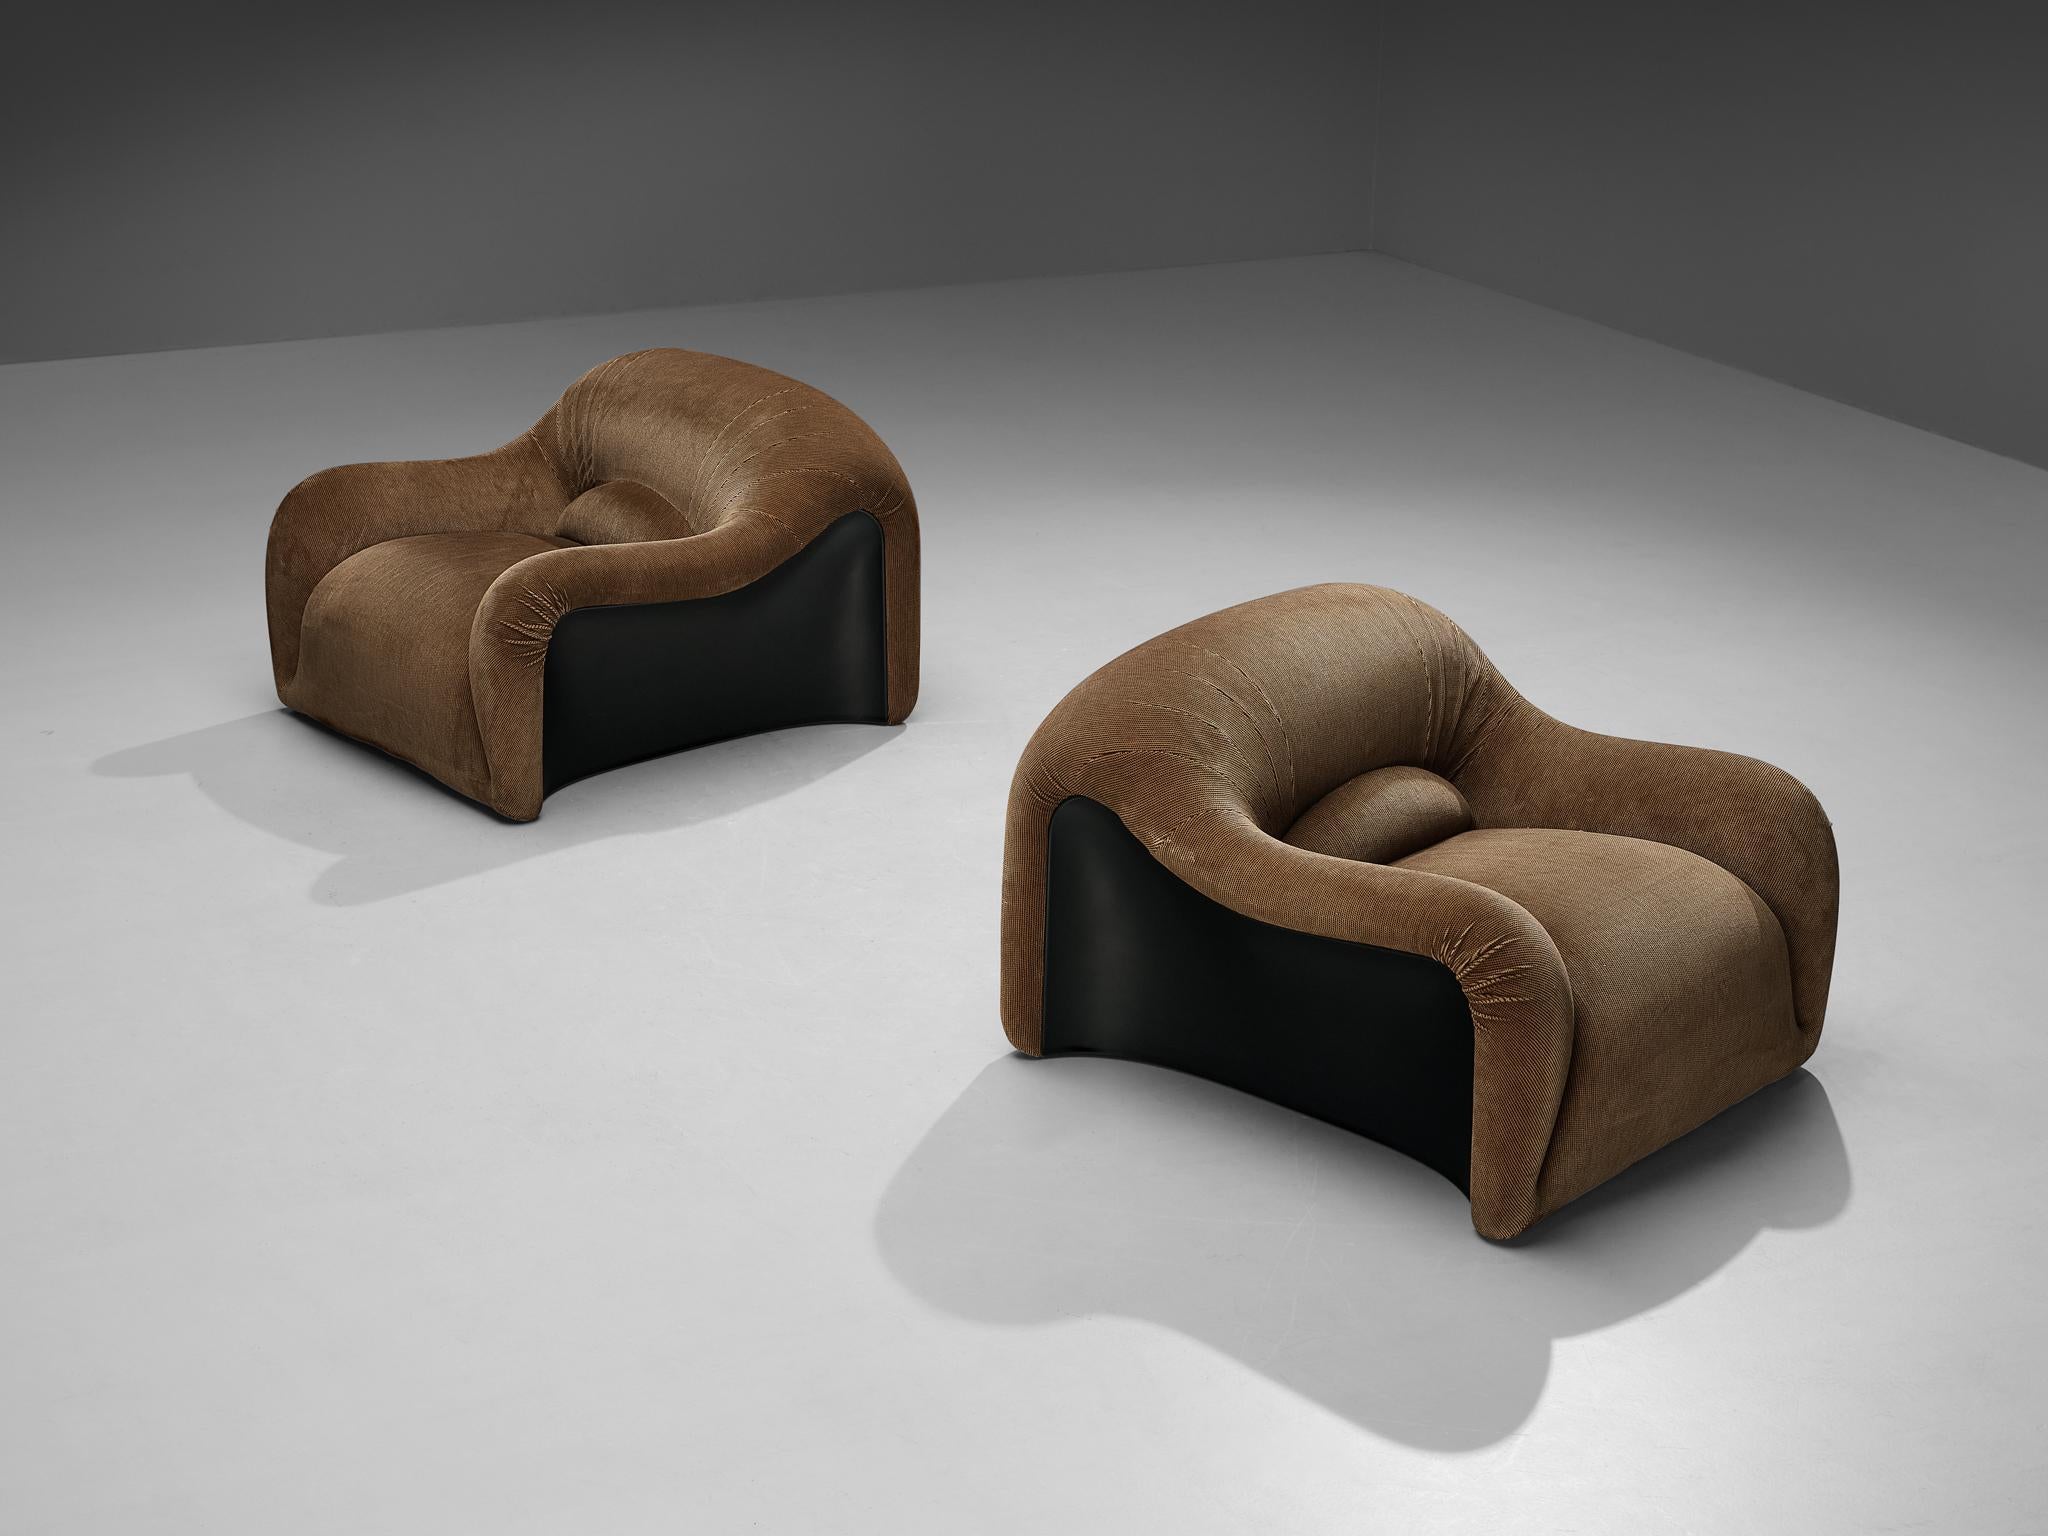 Emilio Guarnacci for 1P, pair of 'Ecuba' lounge chairs, Acrylonitrile butadiene styrene, foam, fabric, Italy, 1969 

Stunning pair of lounge chairs by Italian designer Emilio Guarnacci. These chairs form a beautiful and organic appearing whole in a